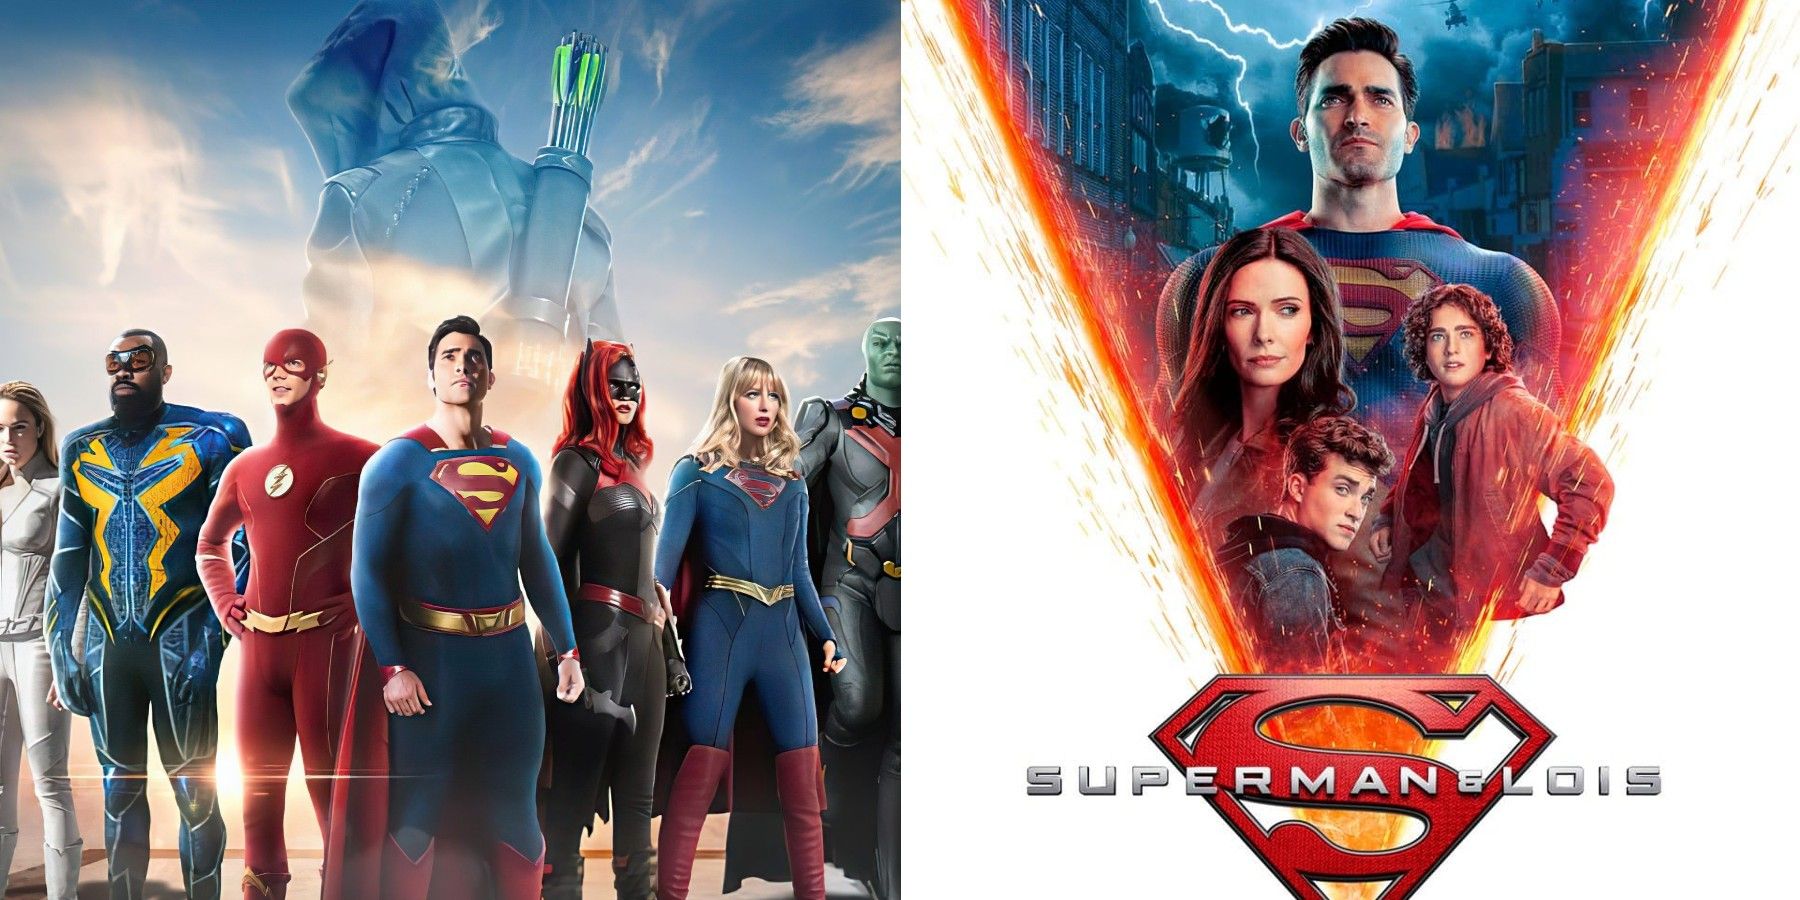 Superman and Lois Arrowverse DC CW